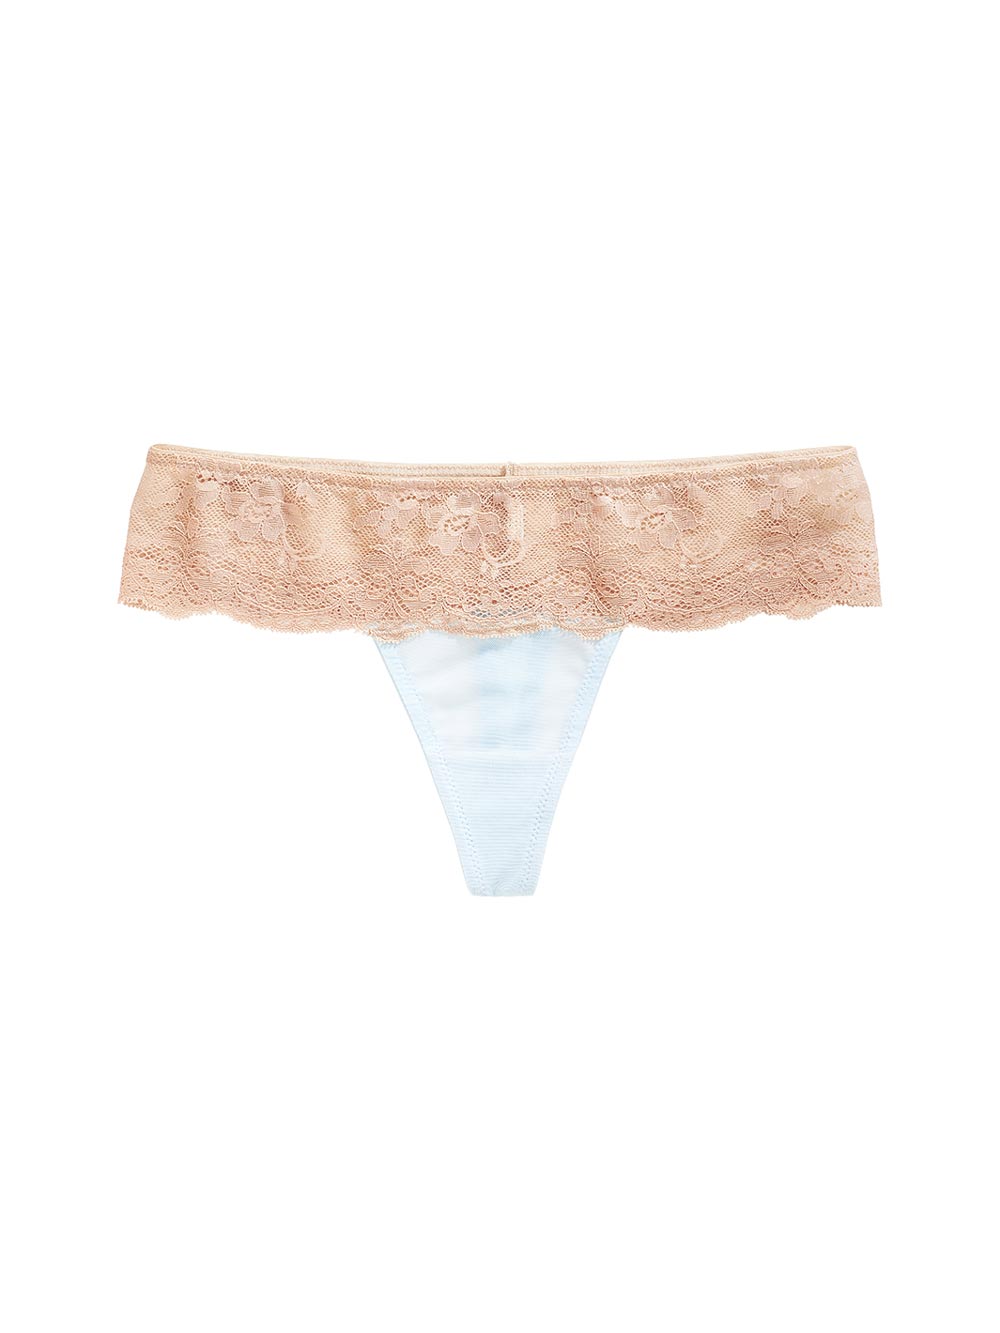 Lucia Low Rise Lace Detailing Thong